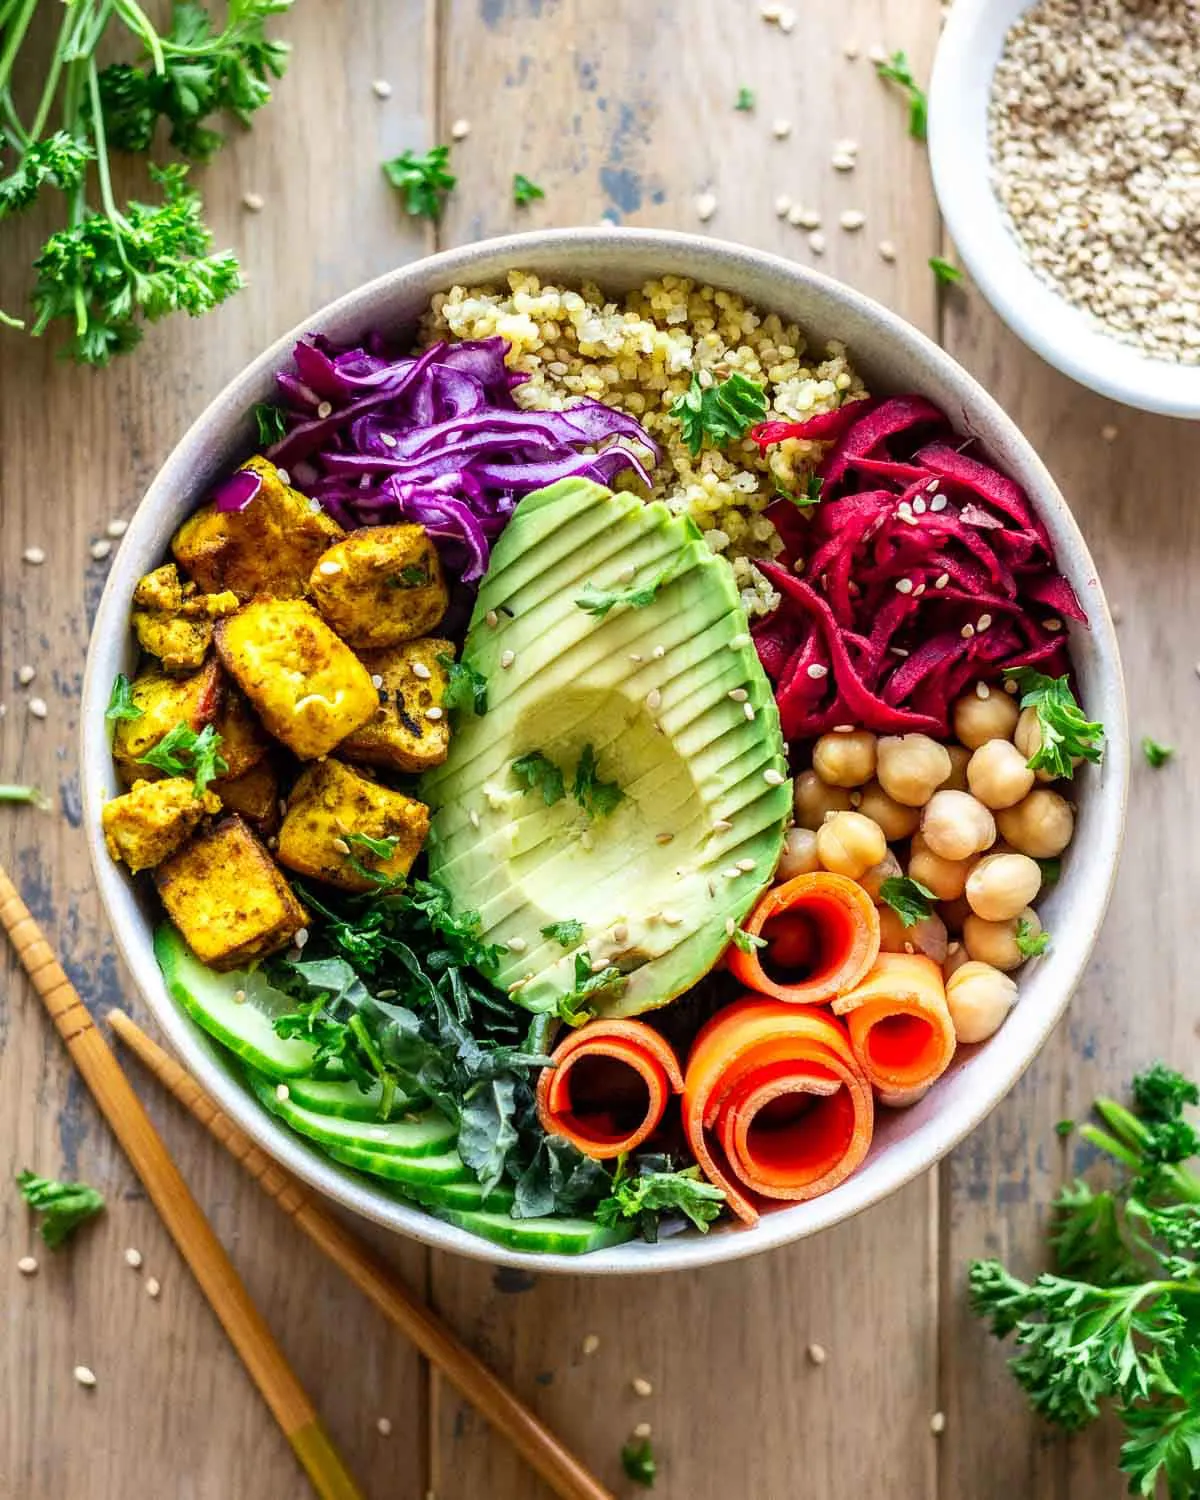 Bowl featuring avocado, turmeric tofu, carrot, millet, chickpeas, cabbage and greens.